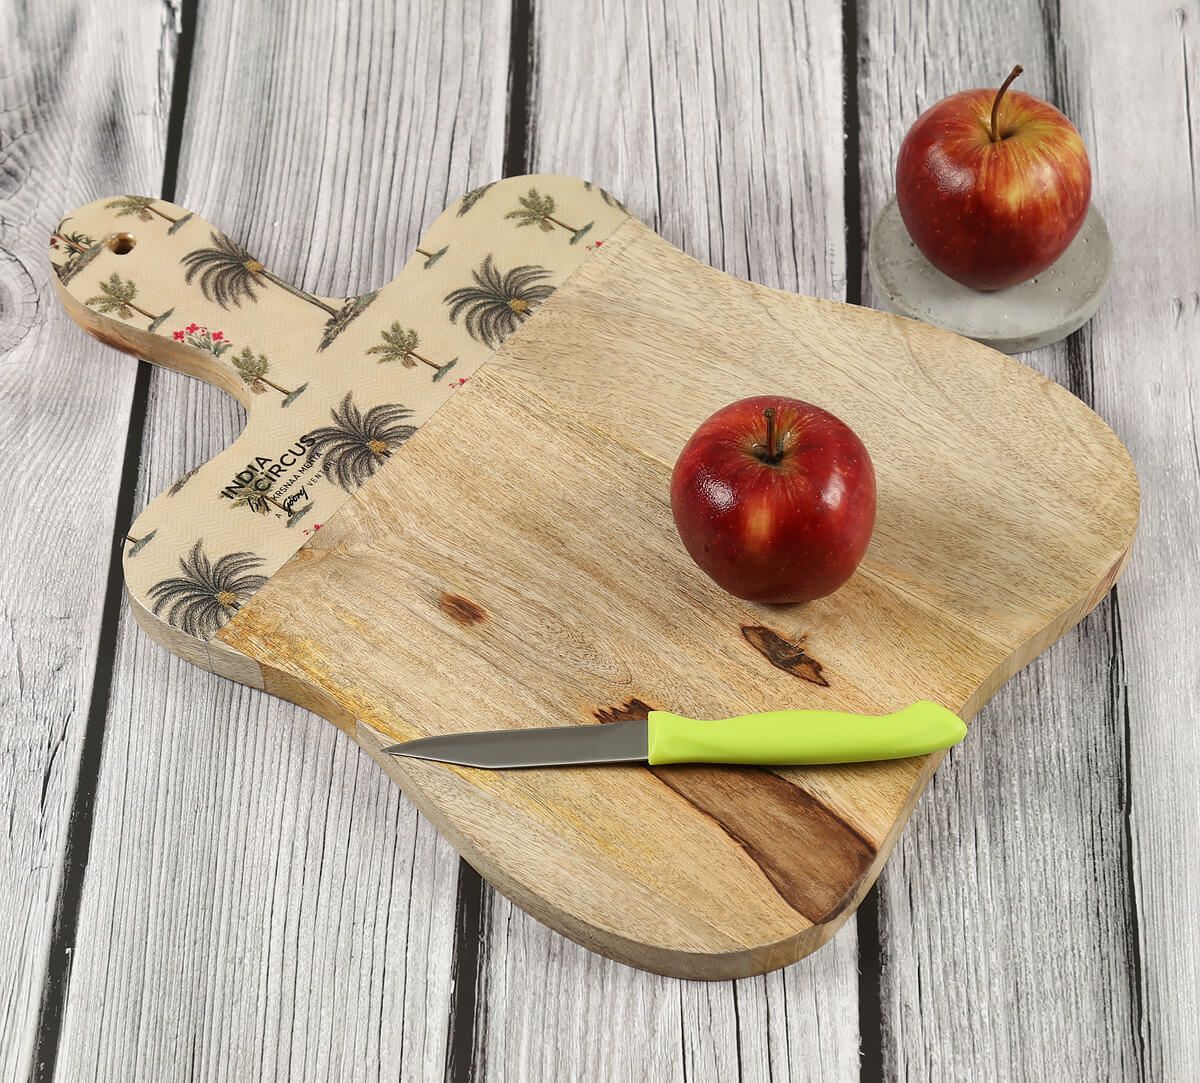 The Benefits of Using a Wooden Kitchen Cutting Board